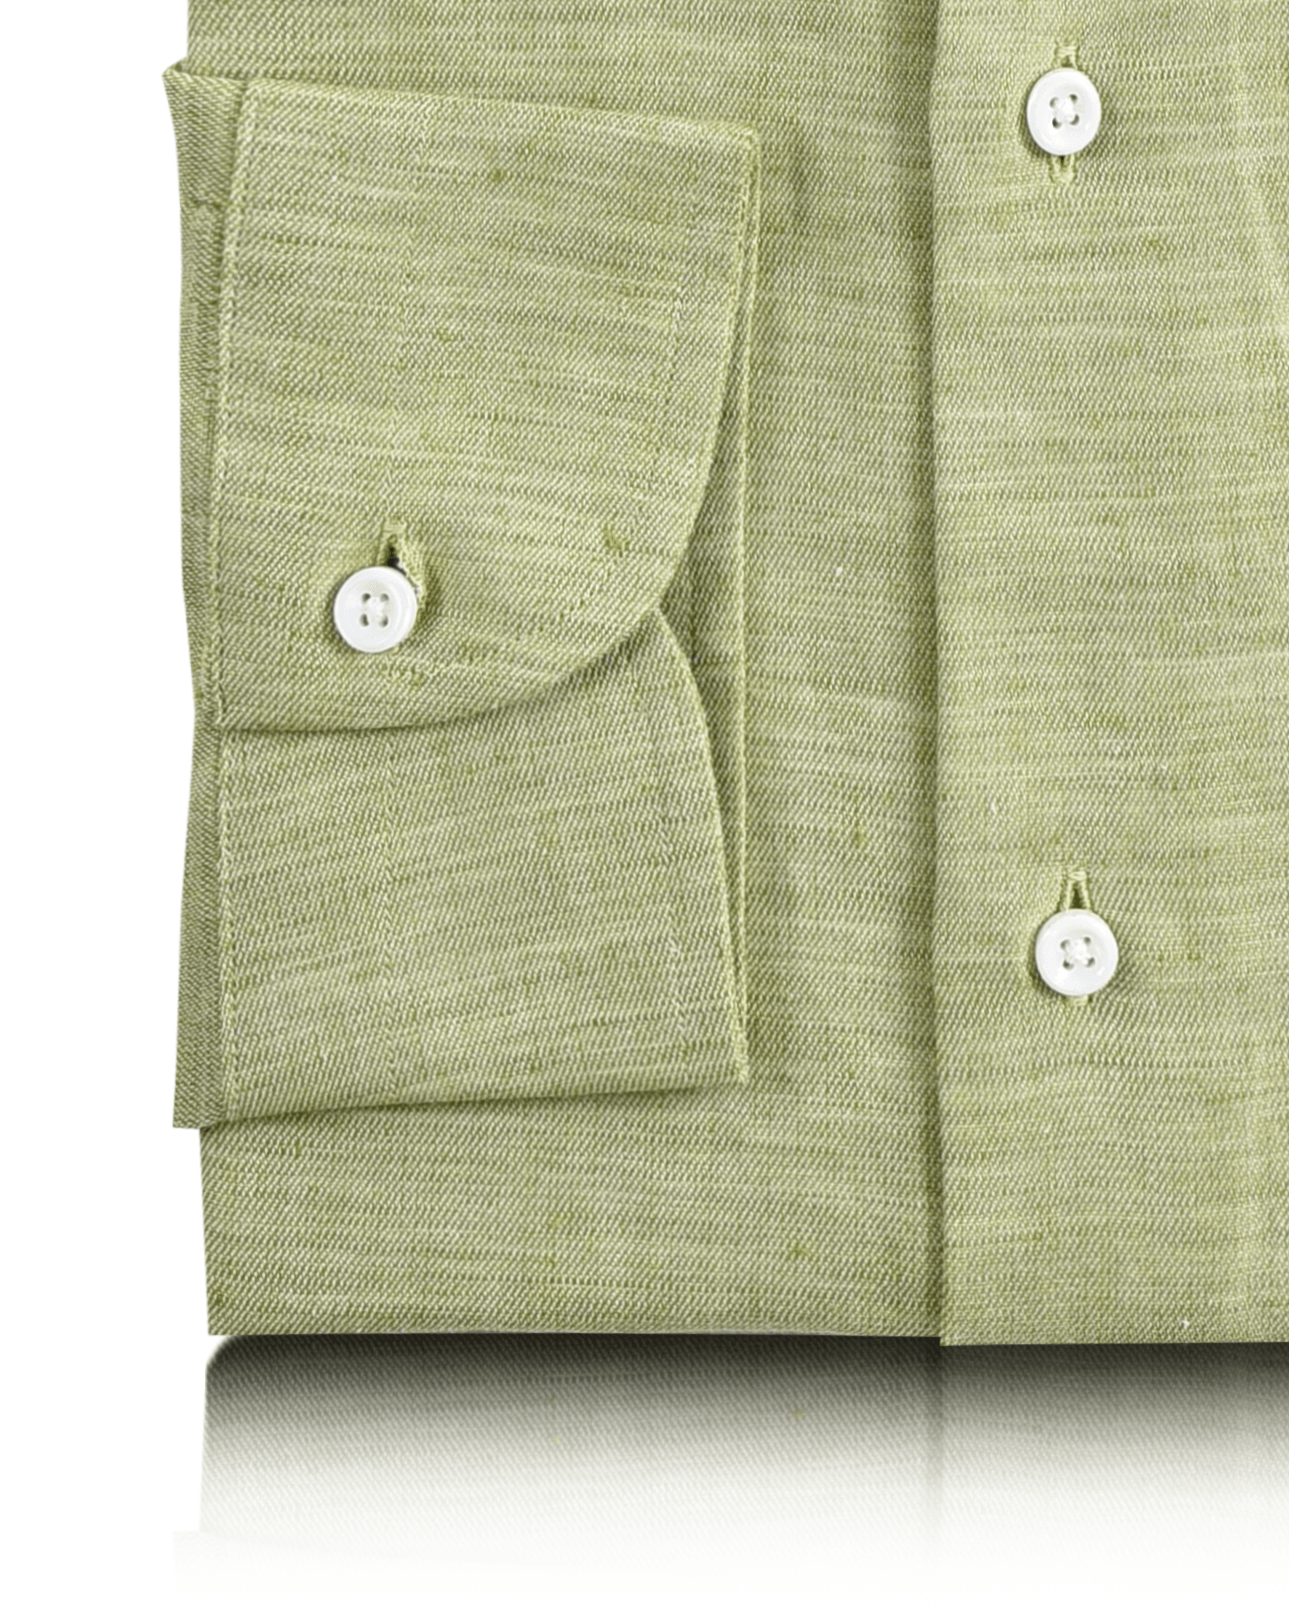 Cuff of the custom linen shirt for men in light green chambray by Luxire Clothing